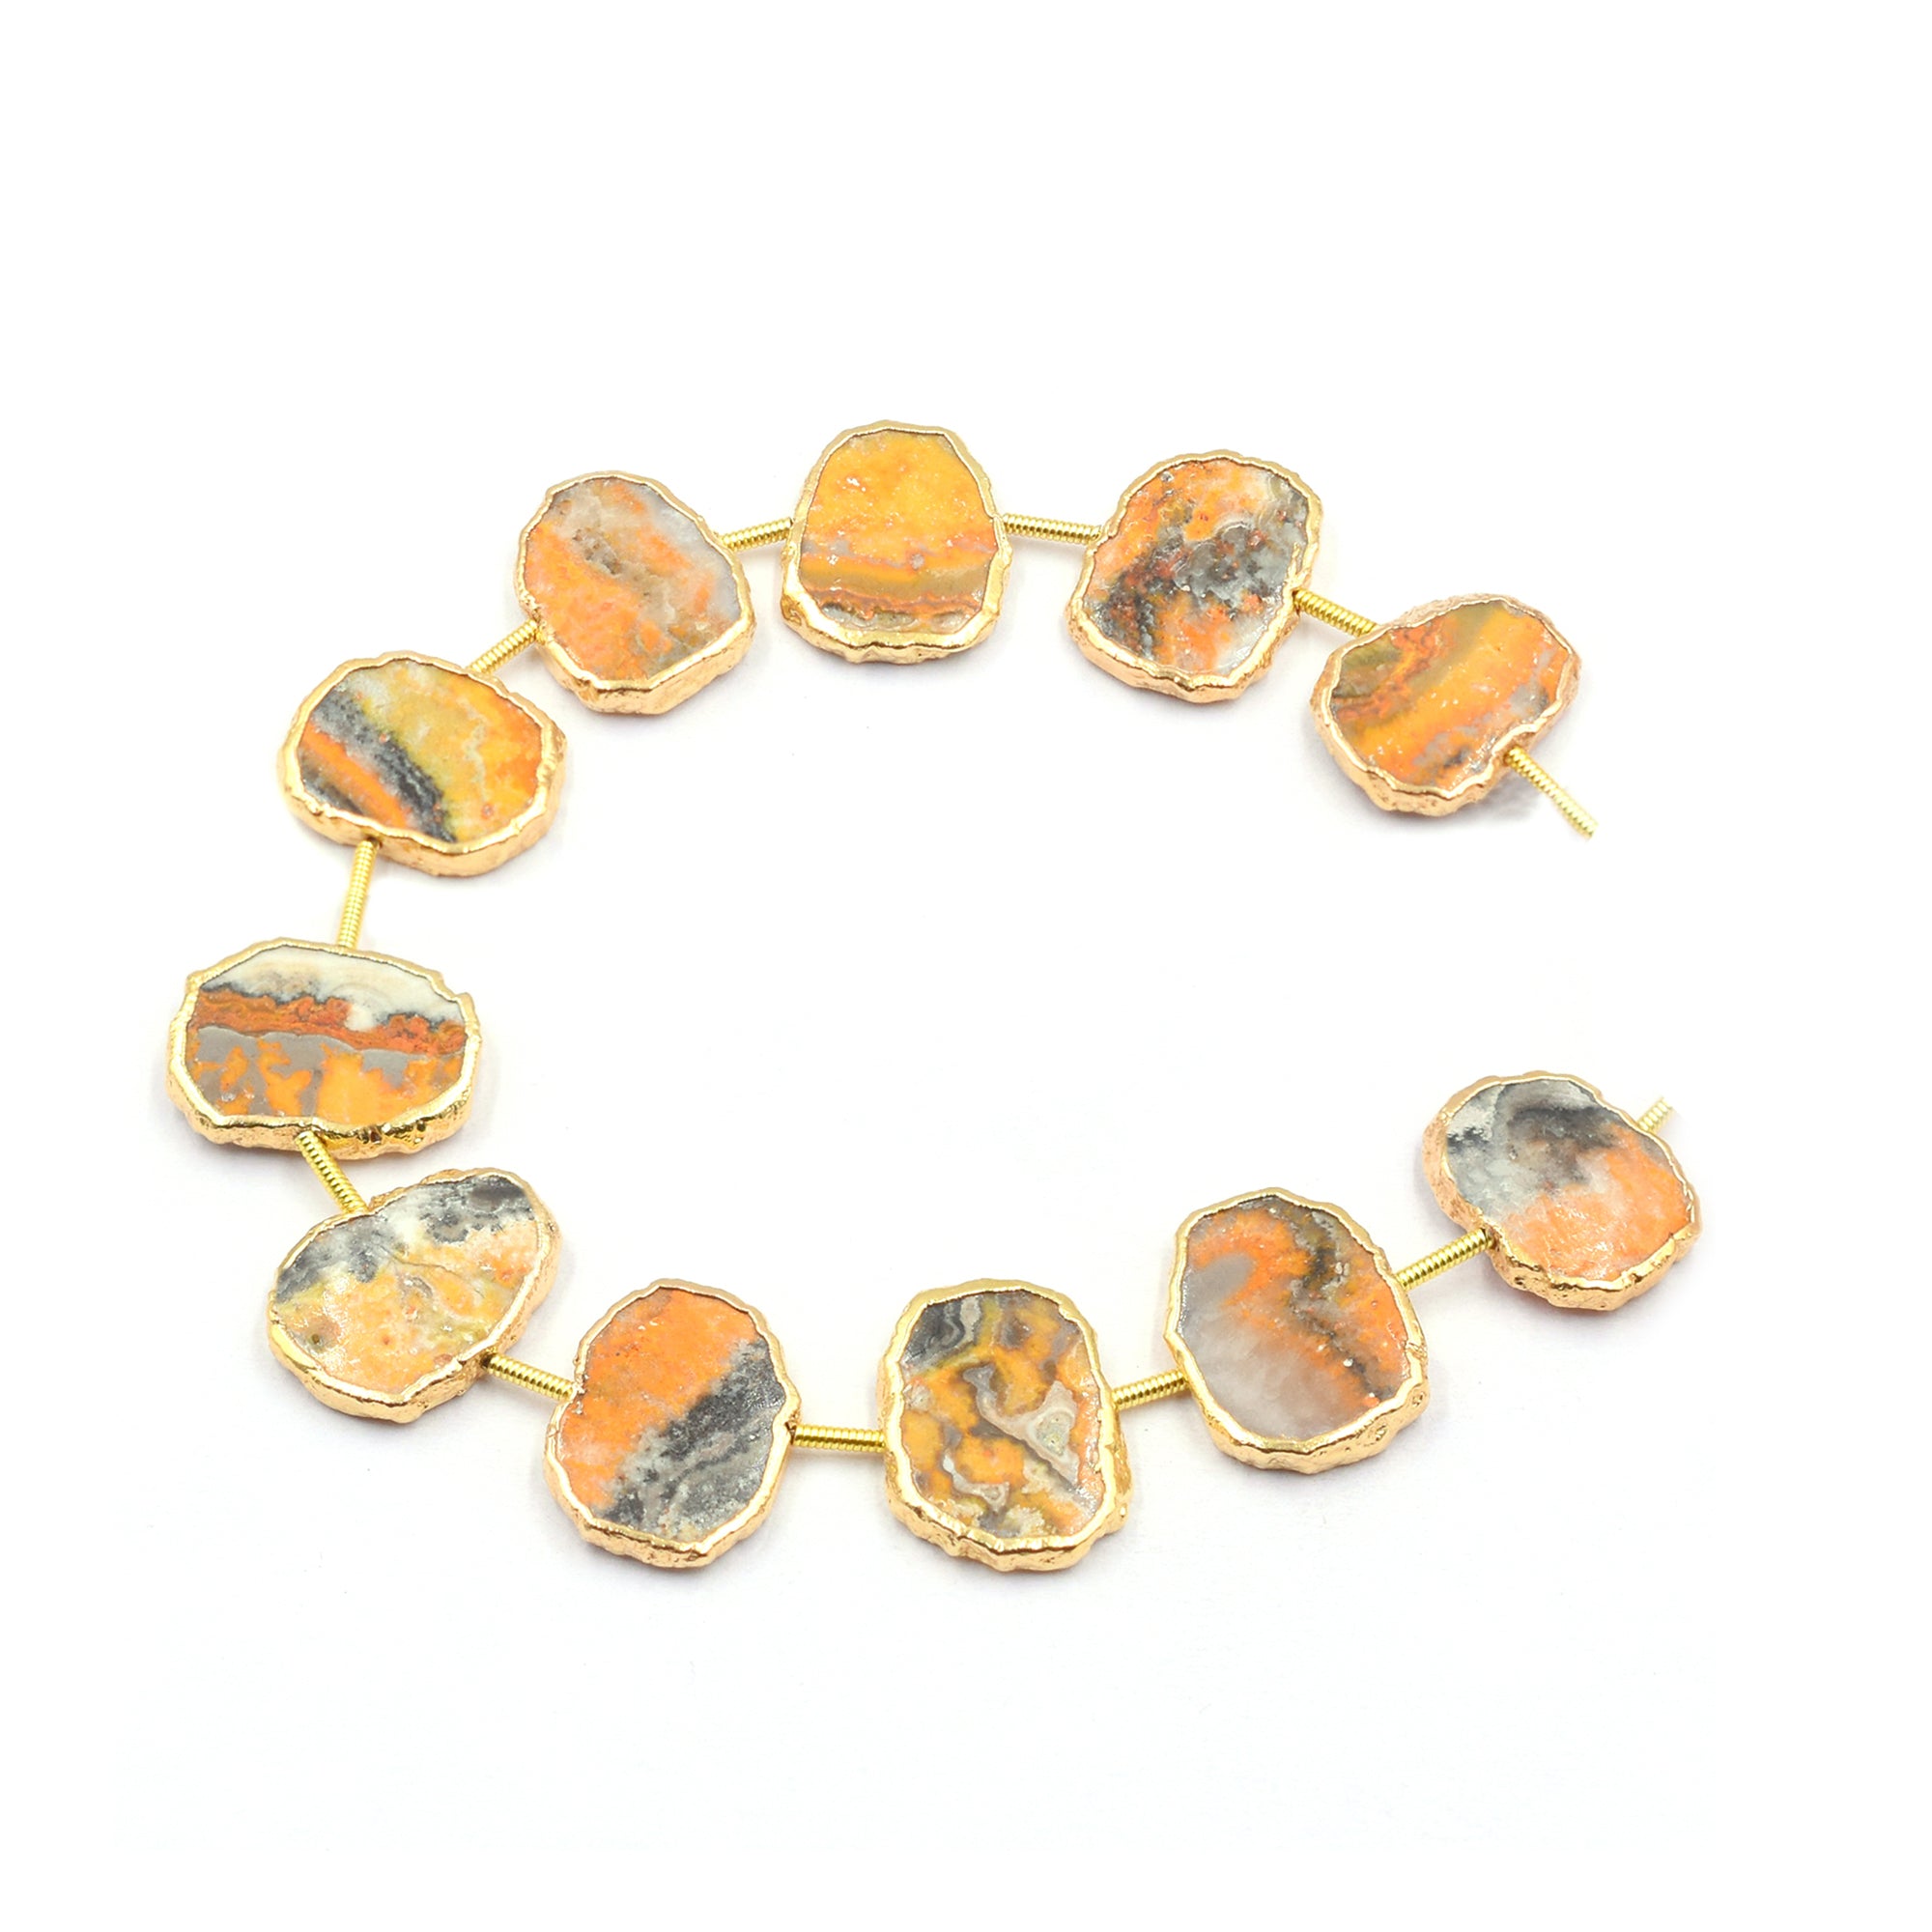 Bumble Bee Jasper 16X12 MM Uneven Shape Coin Drilled Gold Electroplated Strand